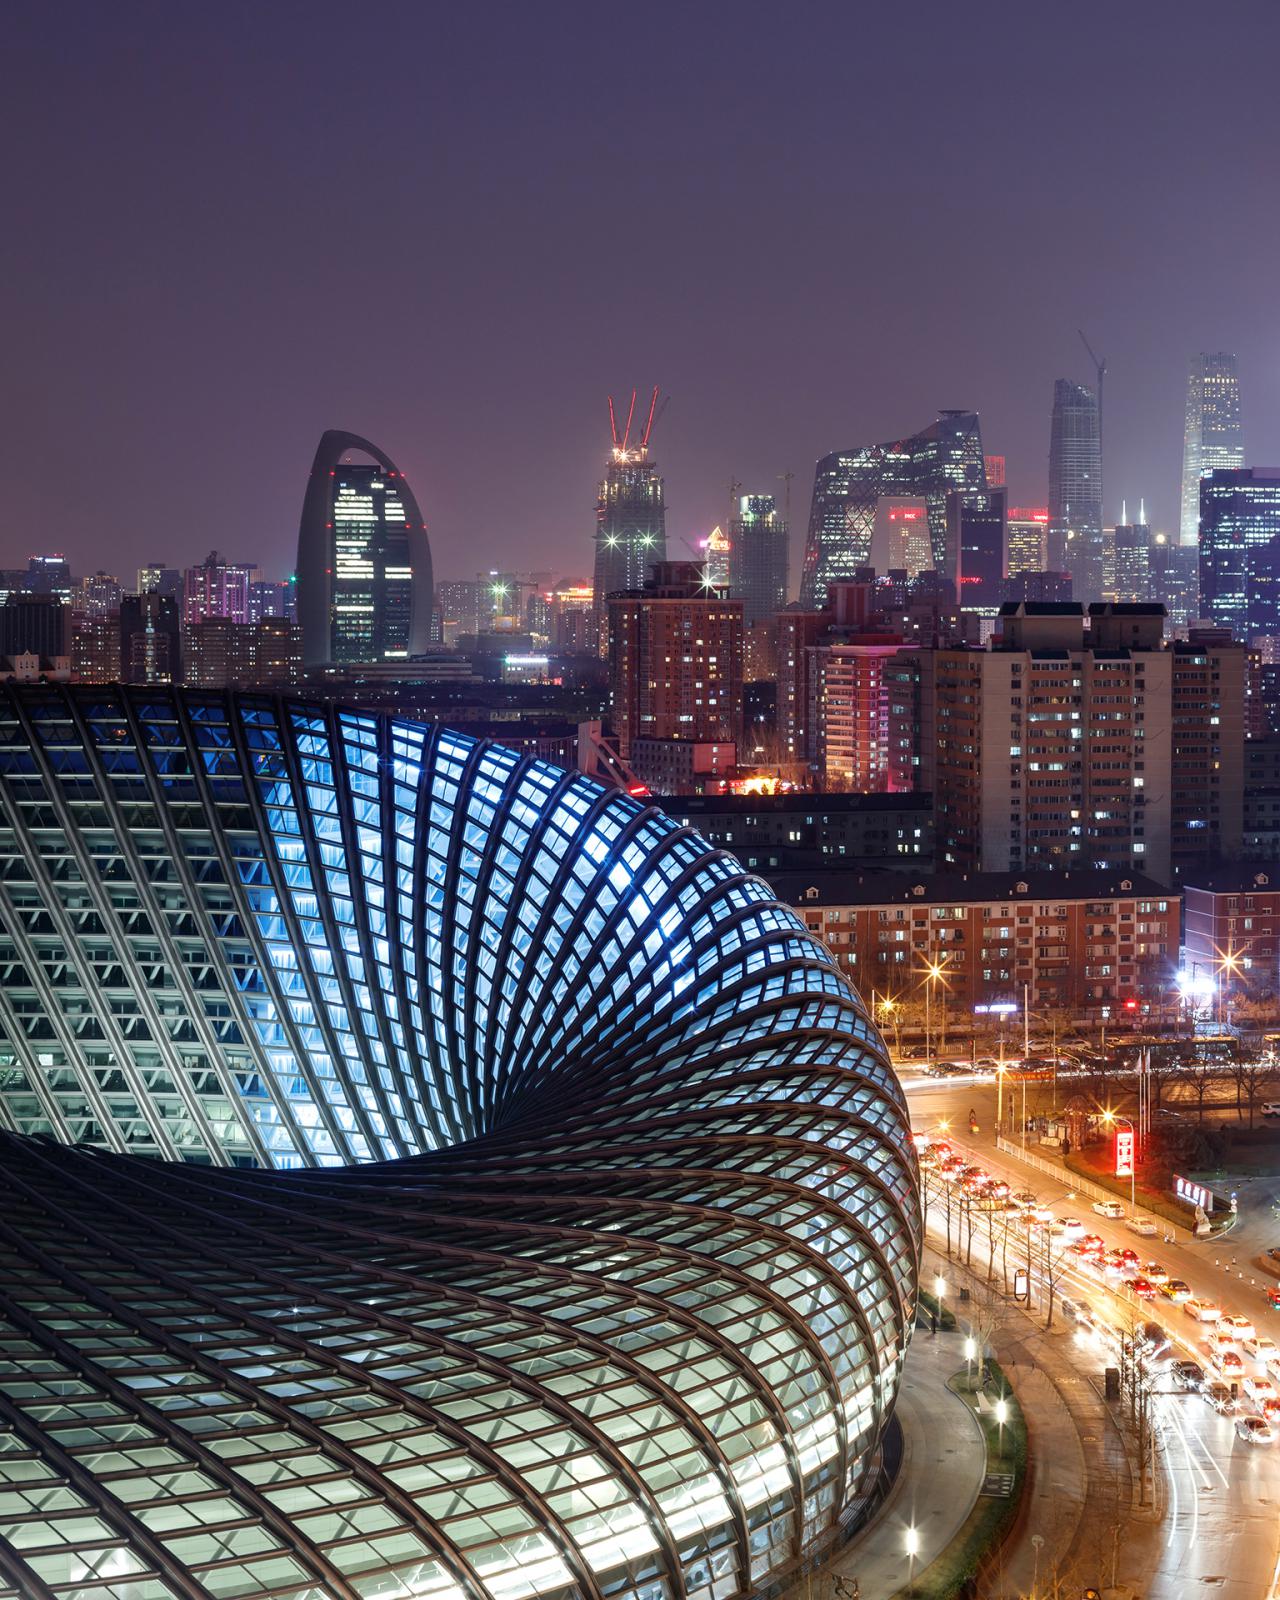 Photograph of Phoenix International Media Center, designed by BIAD UFo and located in Beijing, China